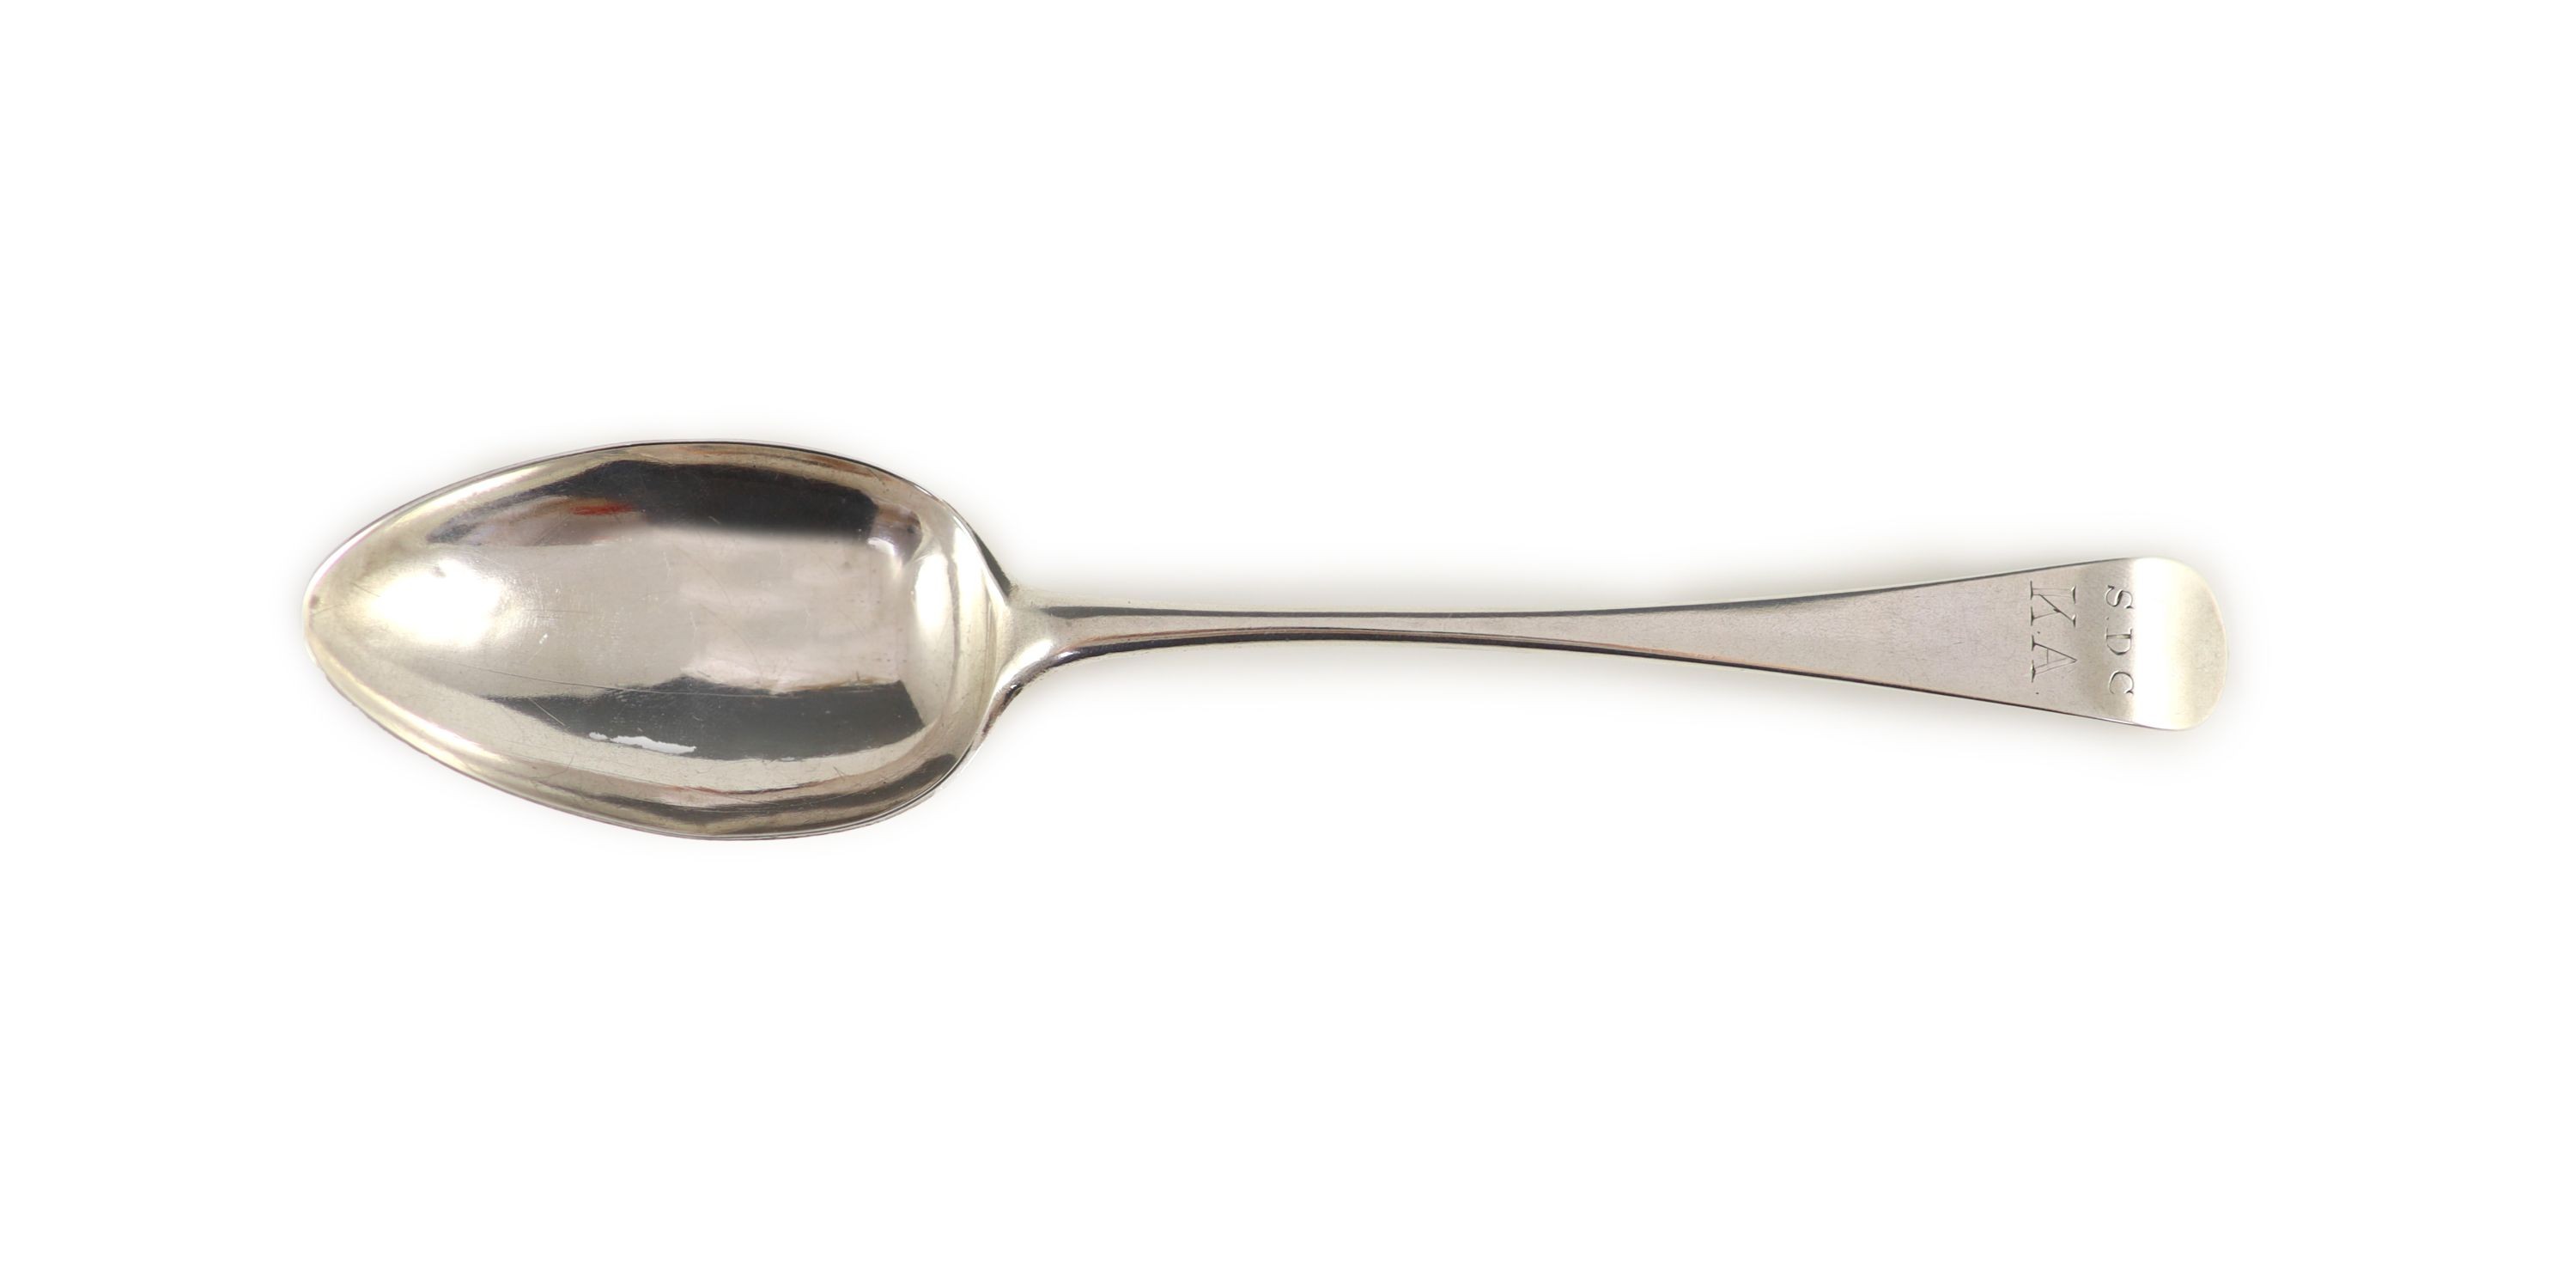 A George III Channel Islands silver tablespoon, initialled ‘S.D.C’ over ‘K.A’, inscribed 1798, attributed to Jacques Quesnel, marked ‘I.Q’ and cannon mark, 20cm long, 1.2 oz.                                              